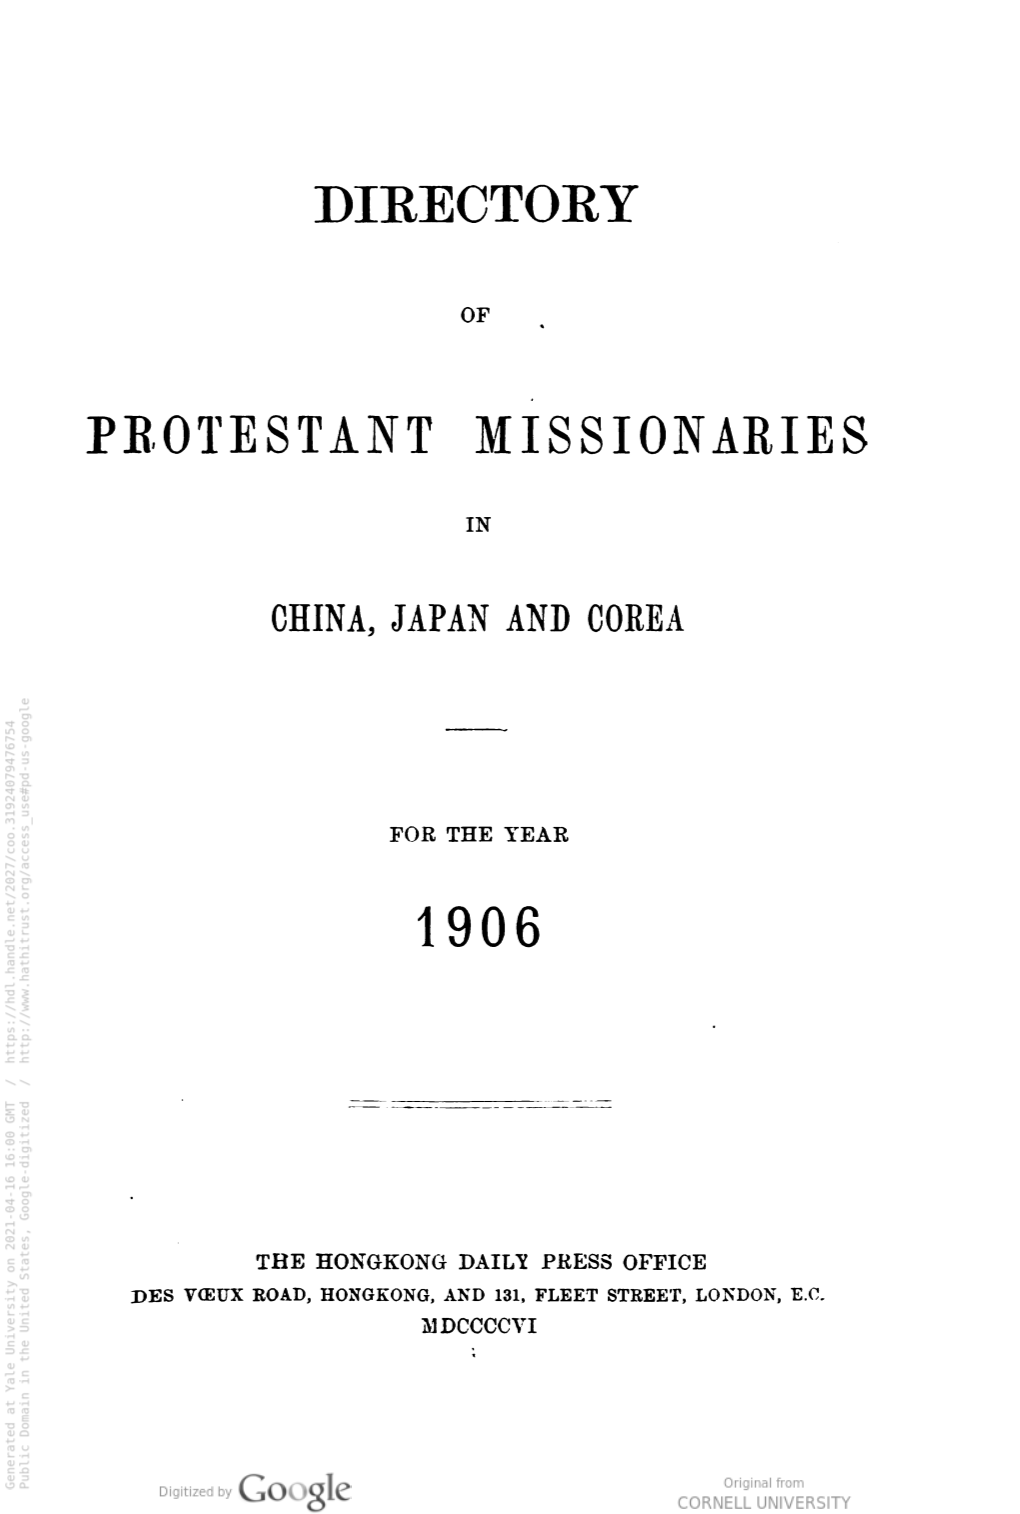 Directory of Protestant Missionaries in China